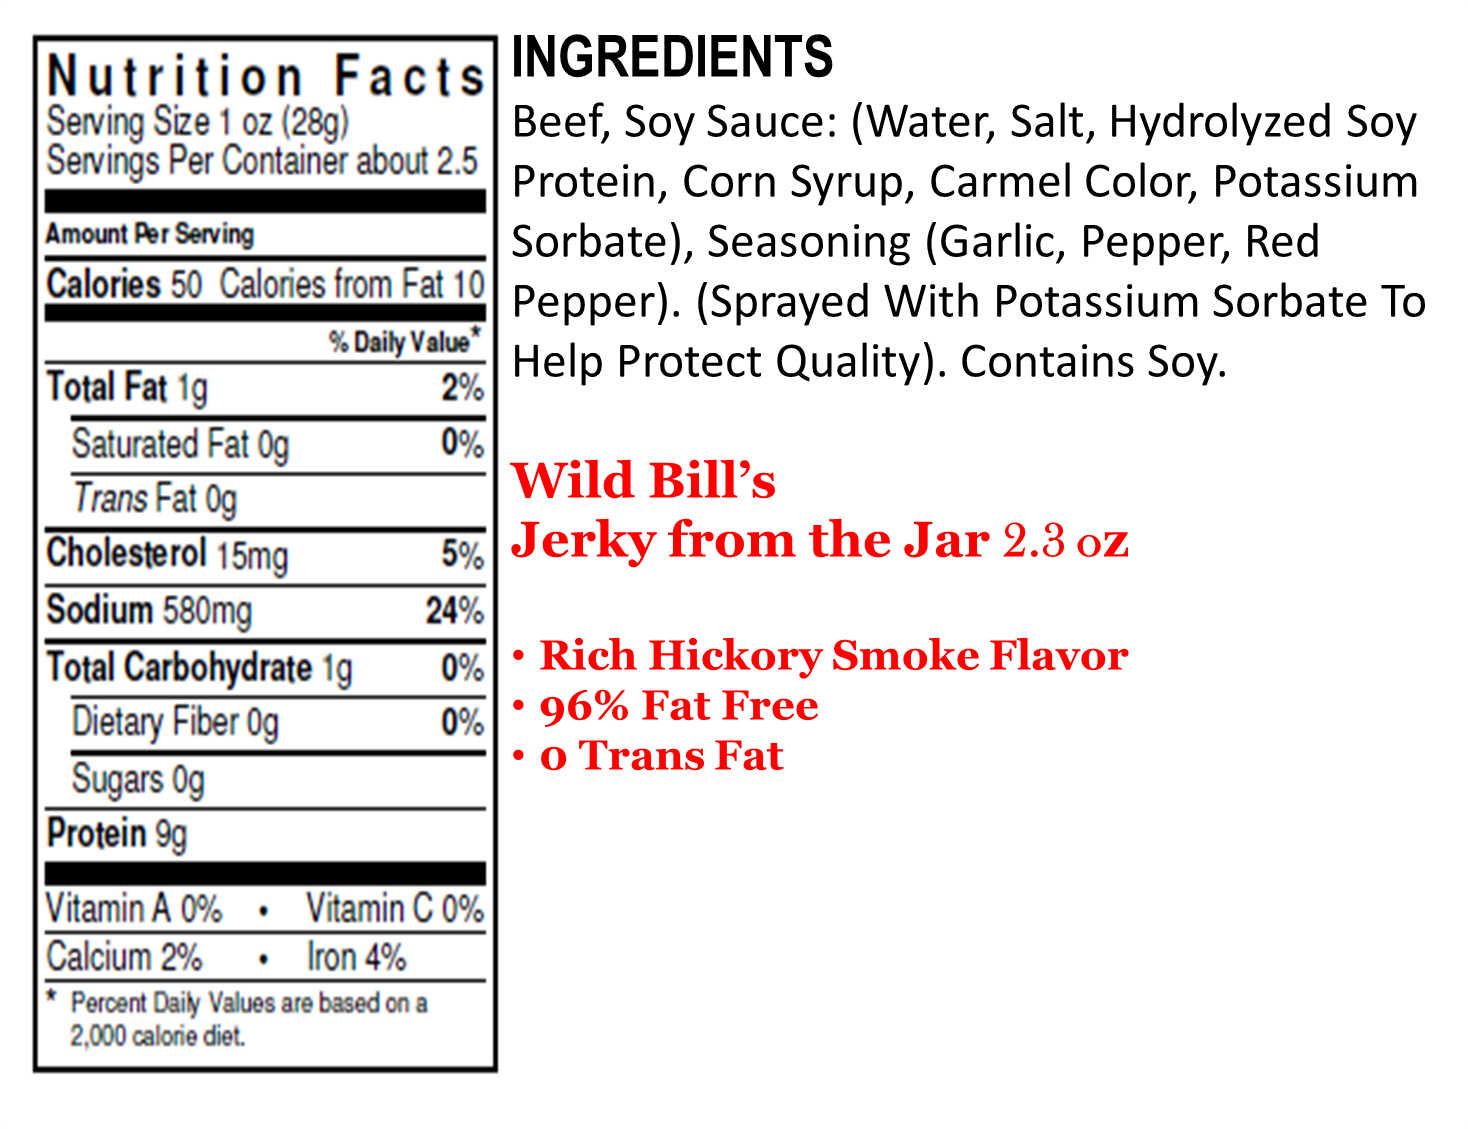 The tenderest pieces from our Mason Jar Jerky are handpacked in this 2.3oz bag.  Bit sized, richly seasoned and hickory smoked, the Jerky from the Jar bag is Bill's personal favorite.  Heck, you can't carry a mason jar with you everywhere you go!DANG, THAT'S GOOD. Ingredients